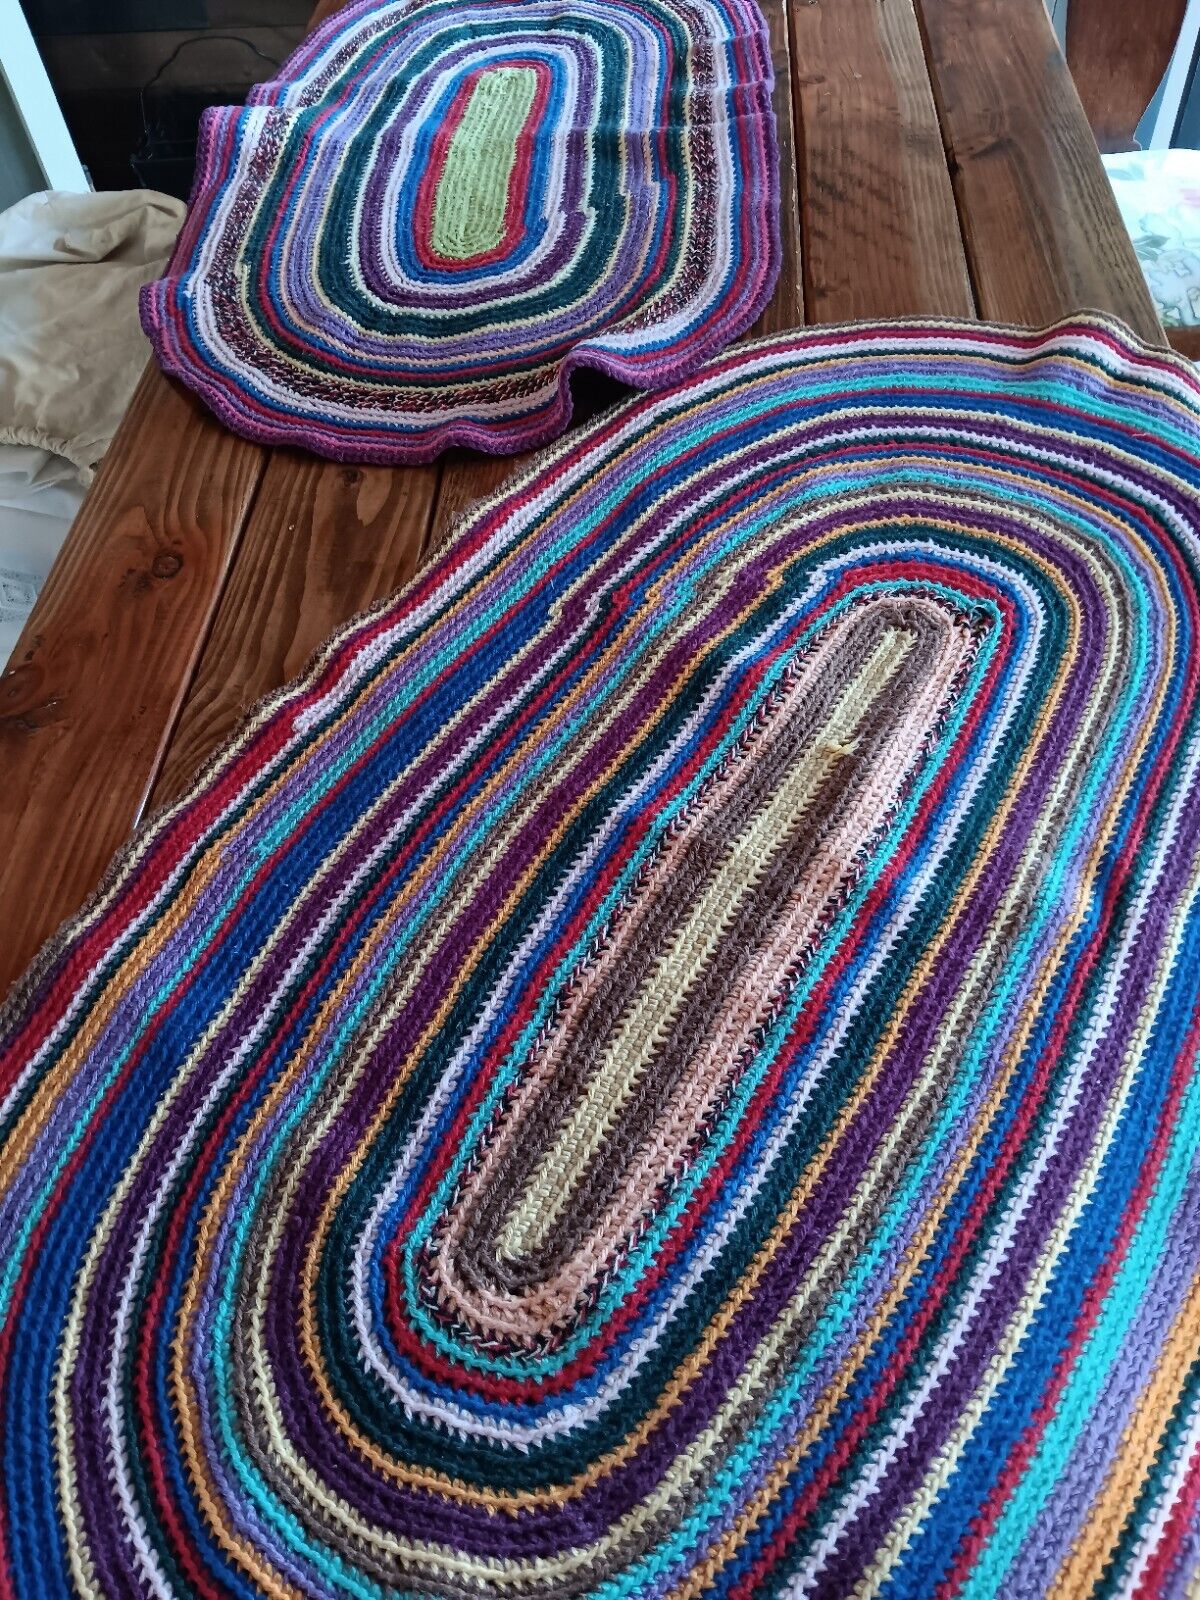 2 Vintage Oval Crocheted Rugs